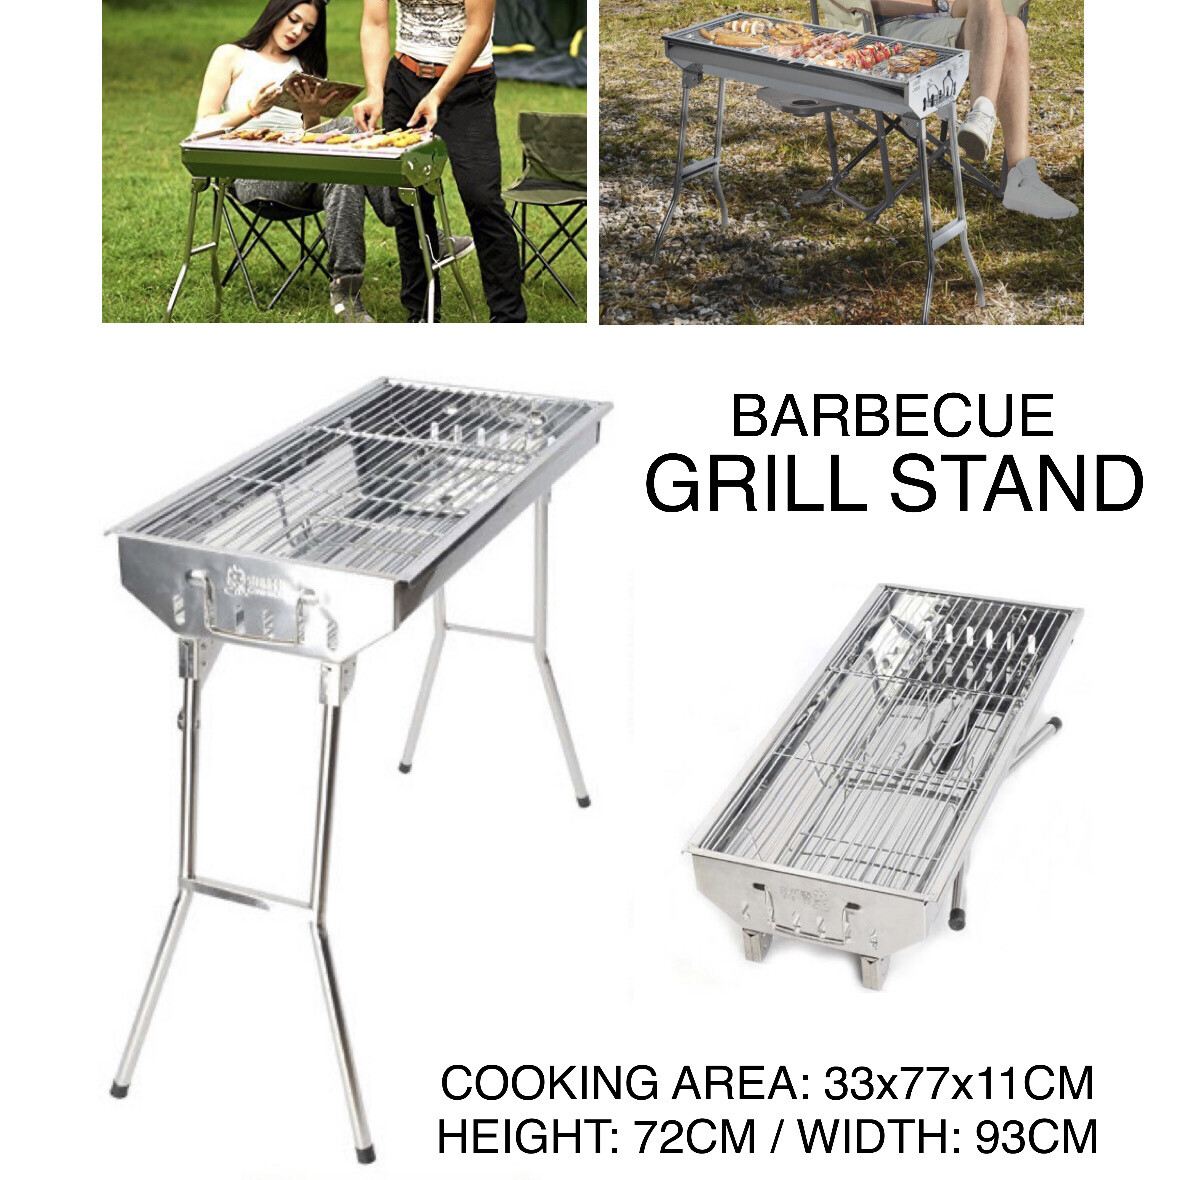 Barbecue Grill Stand